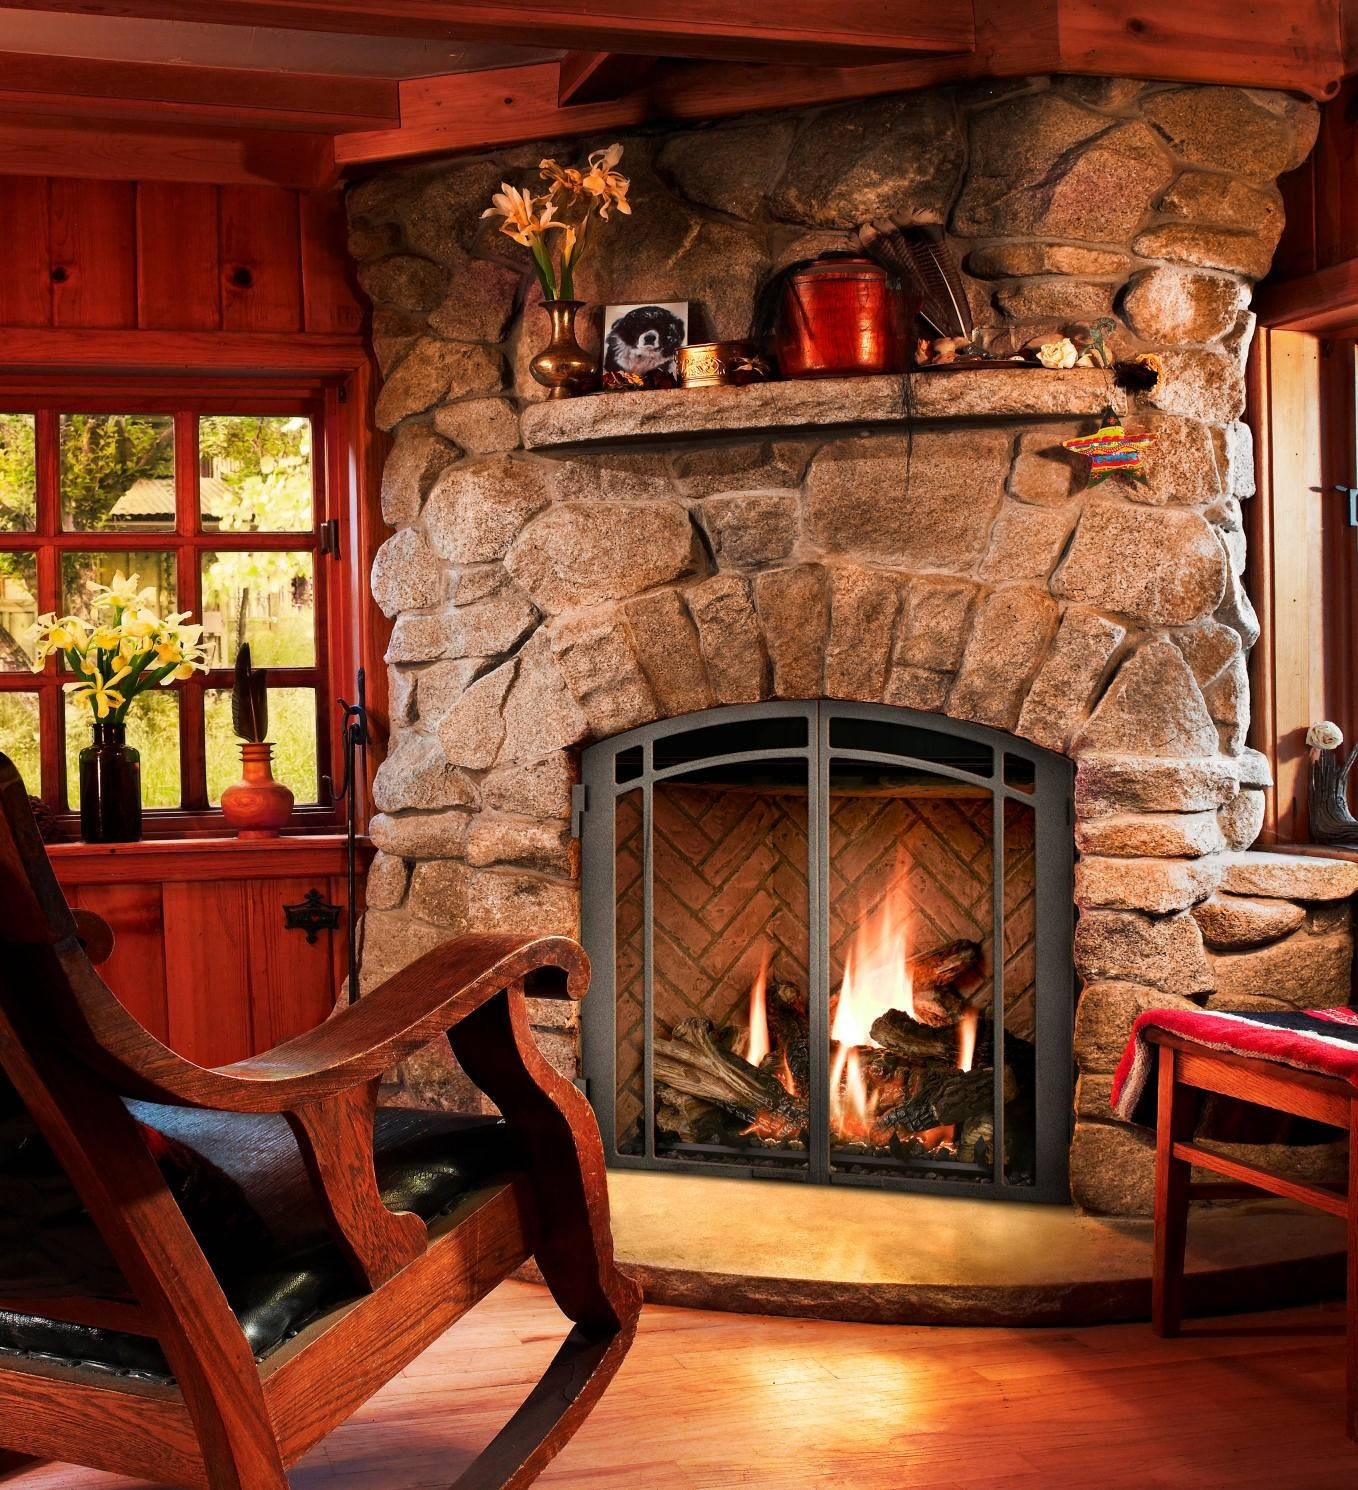 Cleaning tips 101 remove mold from the fireplace without harsh